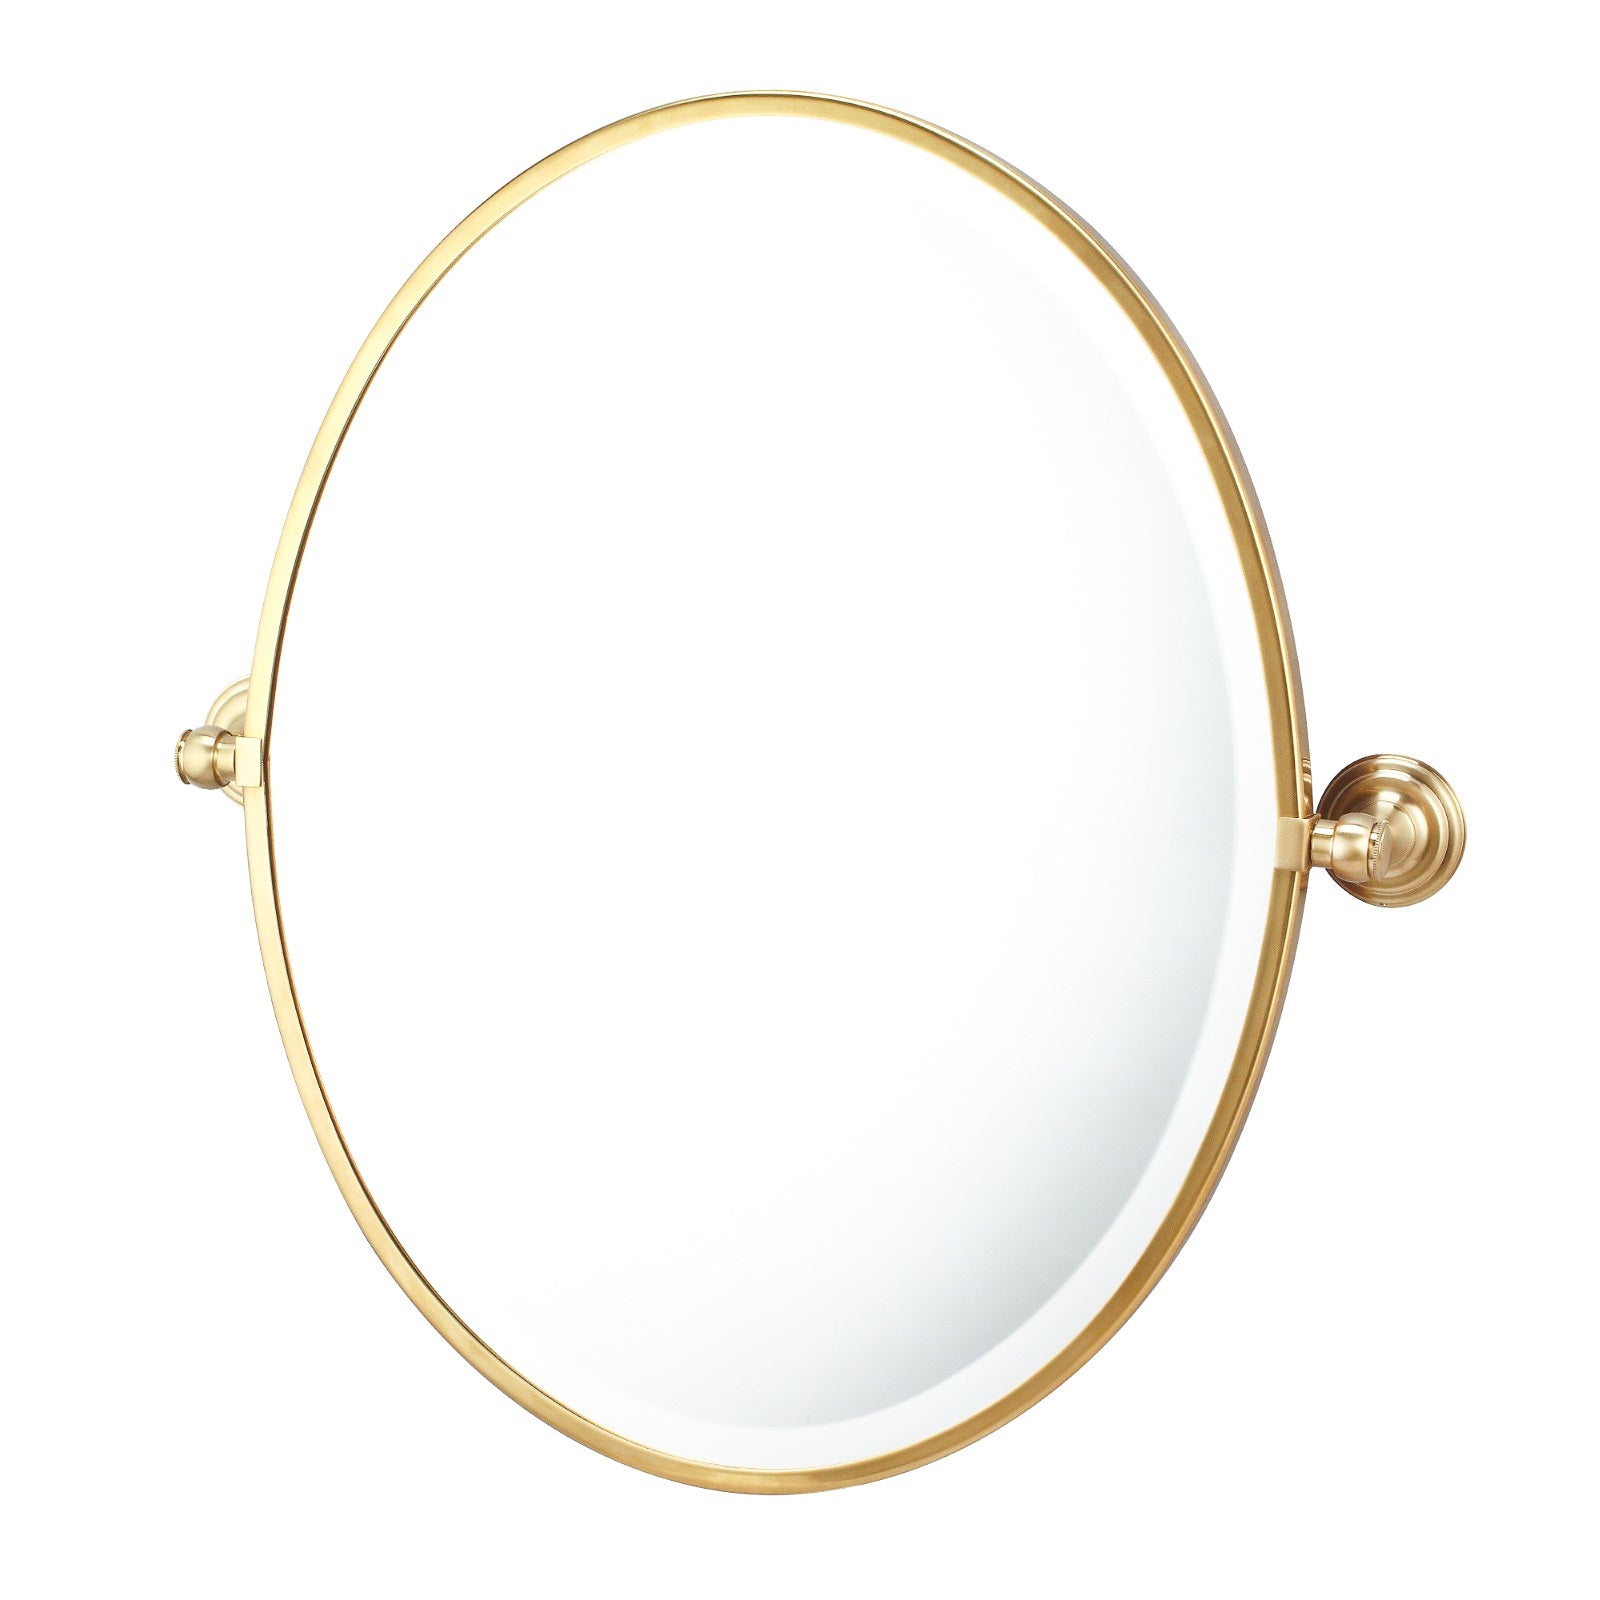 Turner Hastings Mayer Pivot Oval Mirror - Brushed Brass